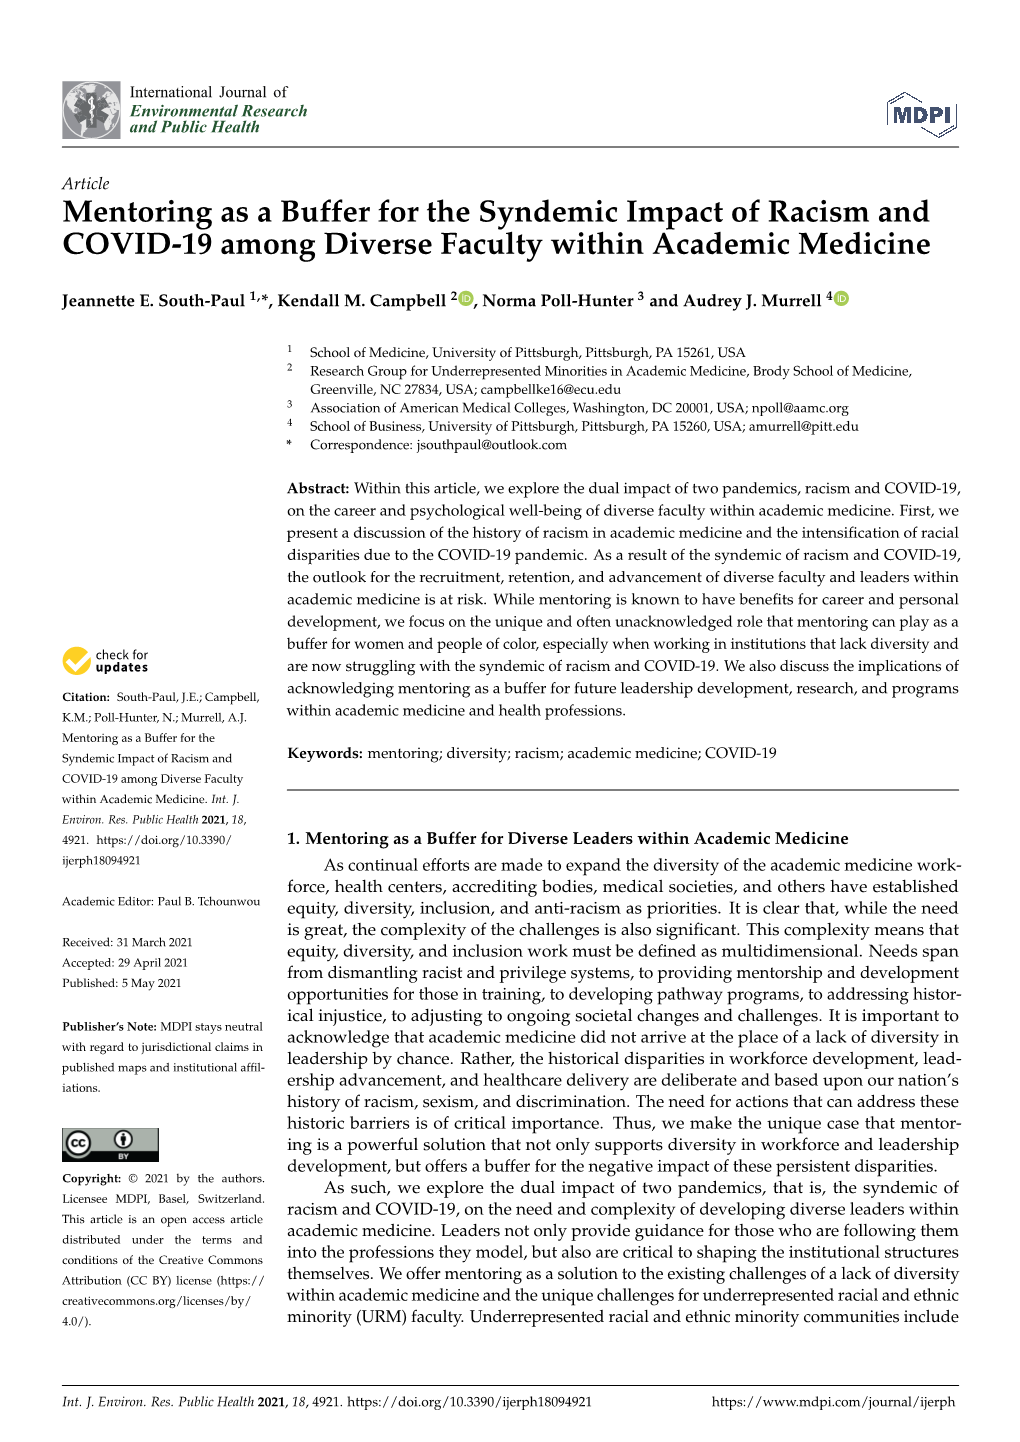 Mentoring As a Buffer for the Syndemic Impact of Racism and COVID-19 Among Diverse Faculty Within Academic Medicine